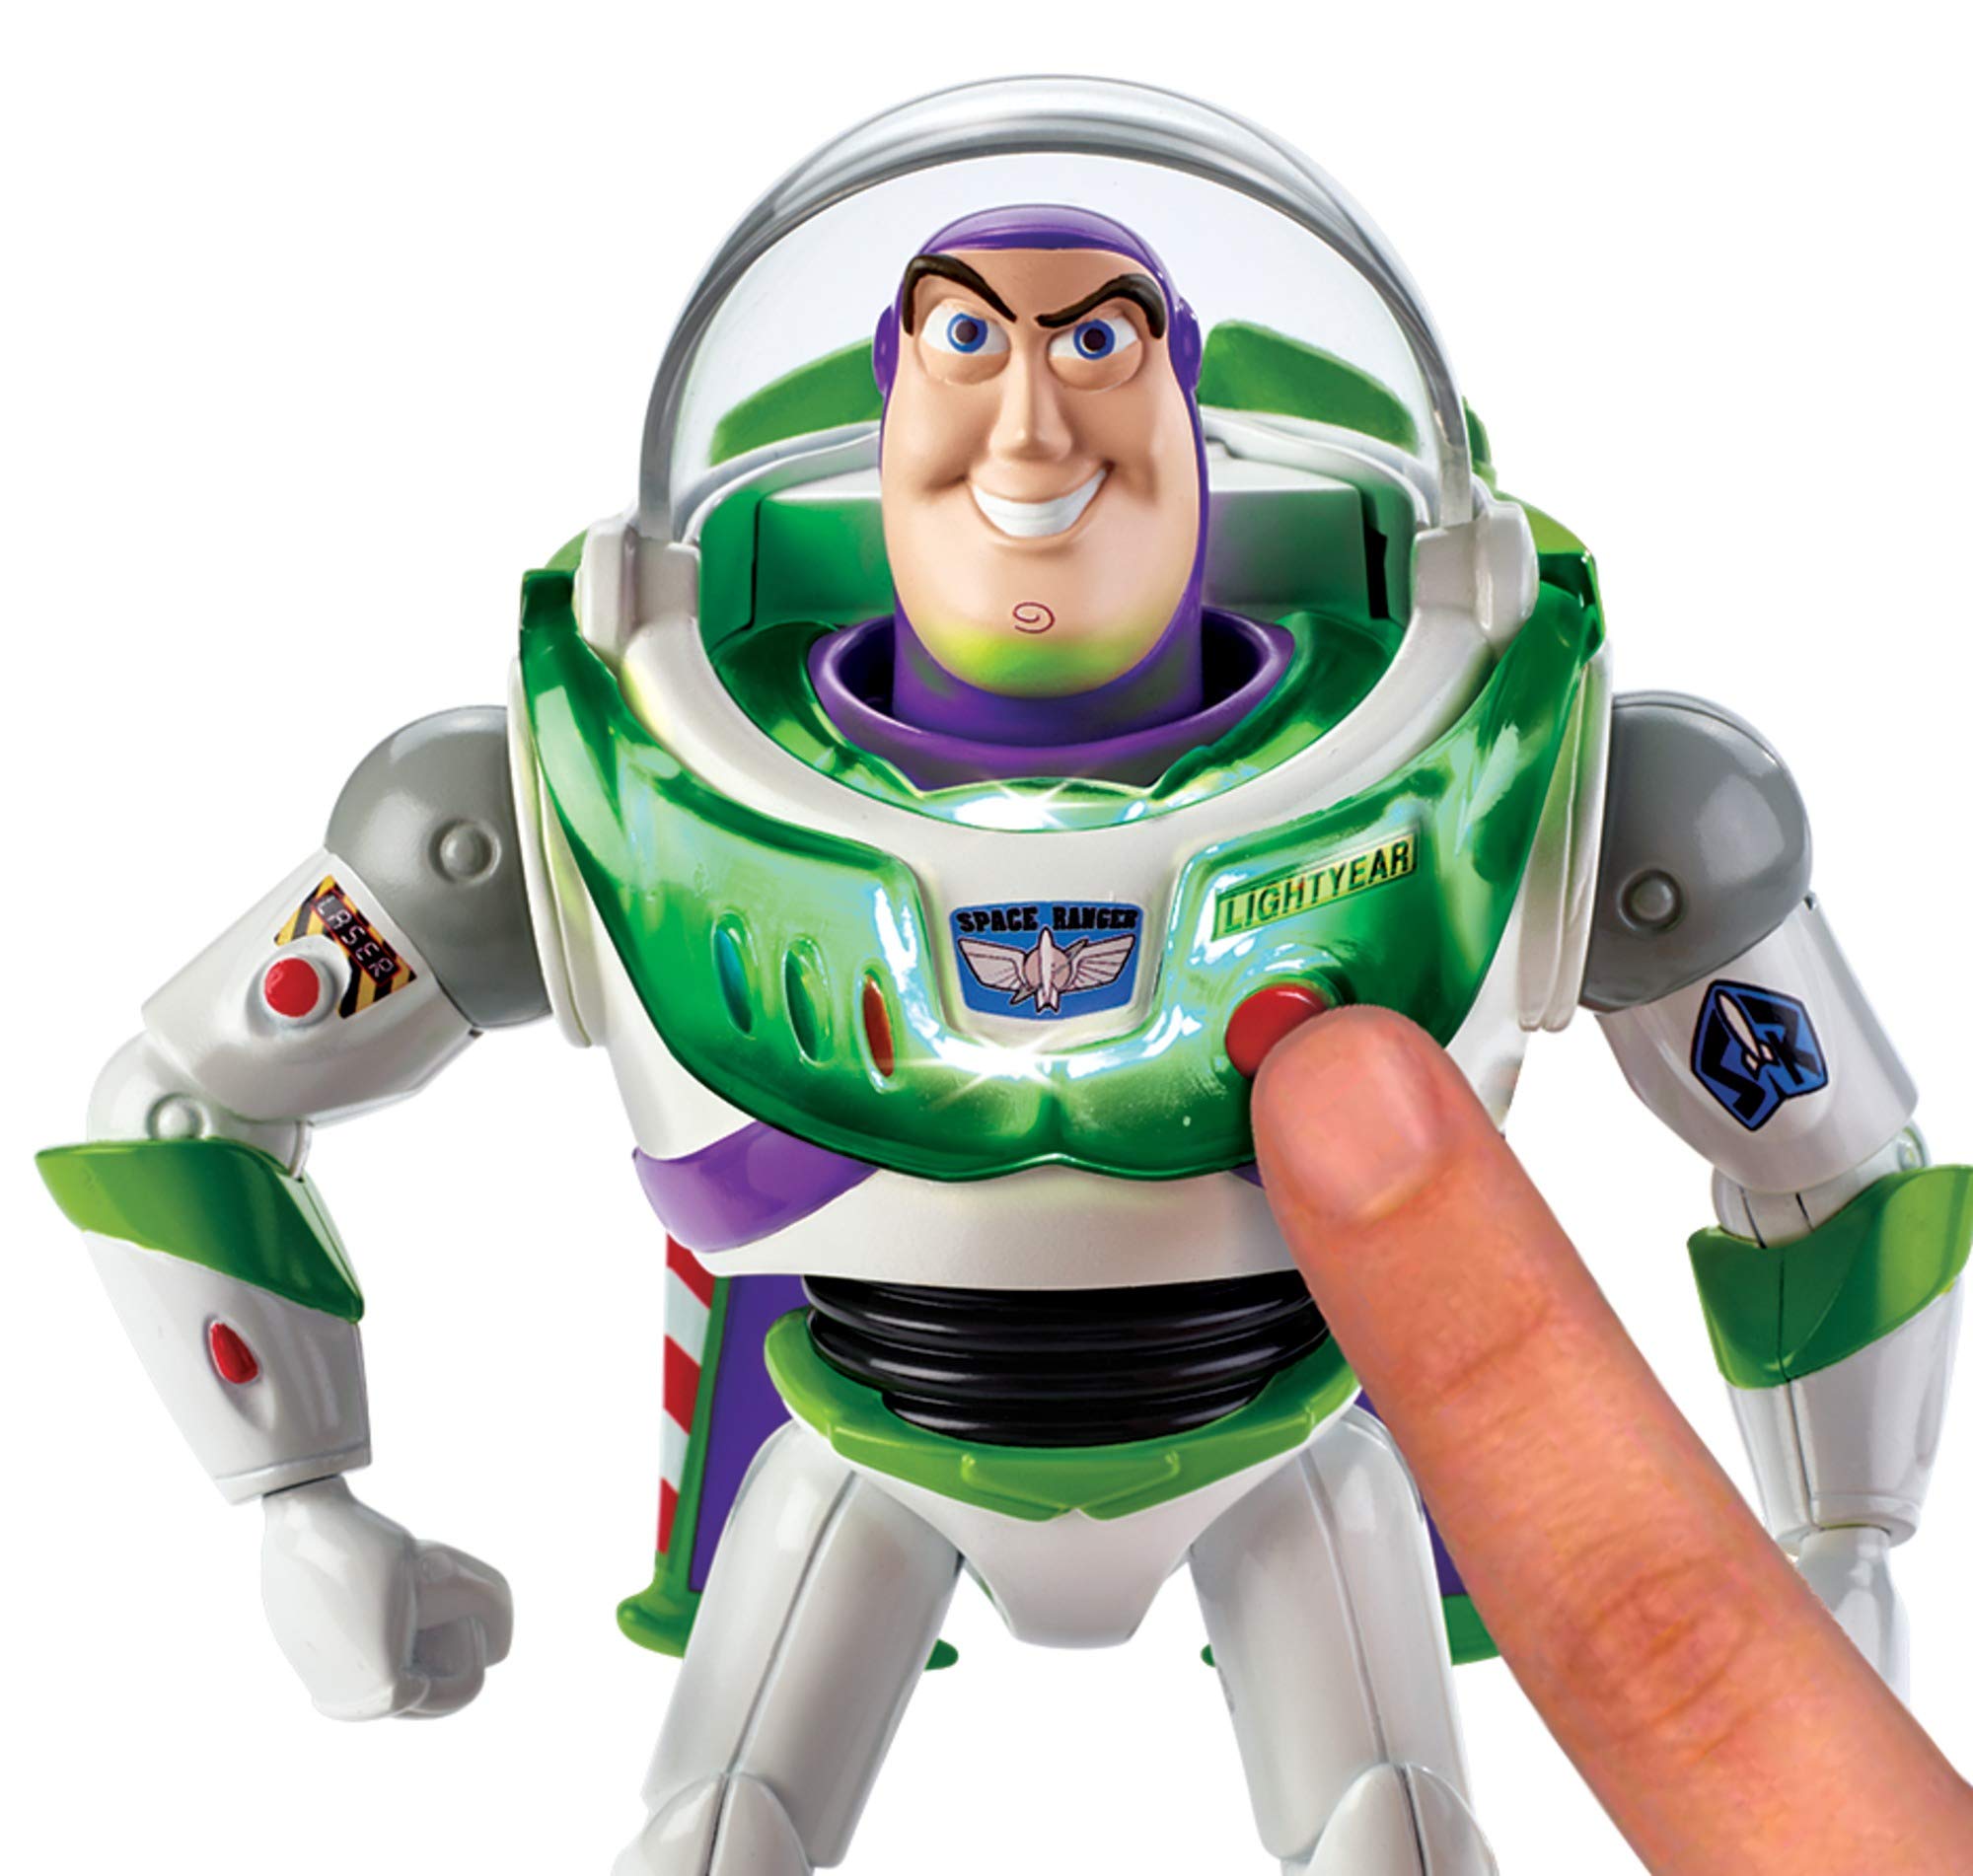 Disney Pixar Toy Story 4 Blast-Off Buzz Lightyear Figure, 7 in / 17.78 cm-Tall, with Lights, Phrases, Sounds and Pop-Out Wings, Gift for Kids 3 Years and Older [Amazon Exclusive]